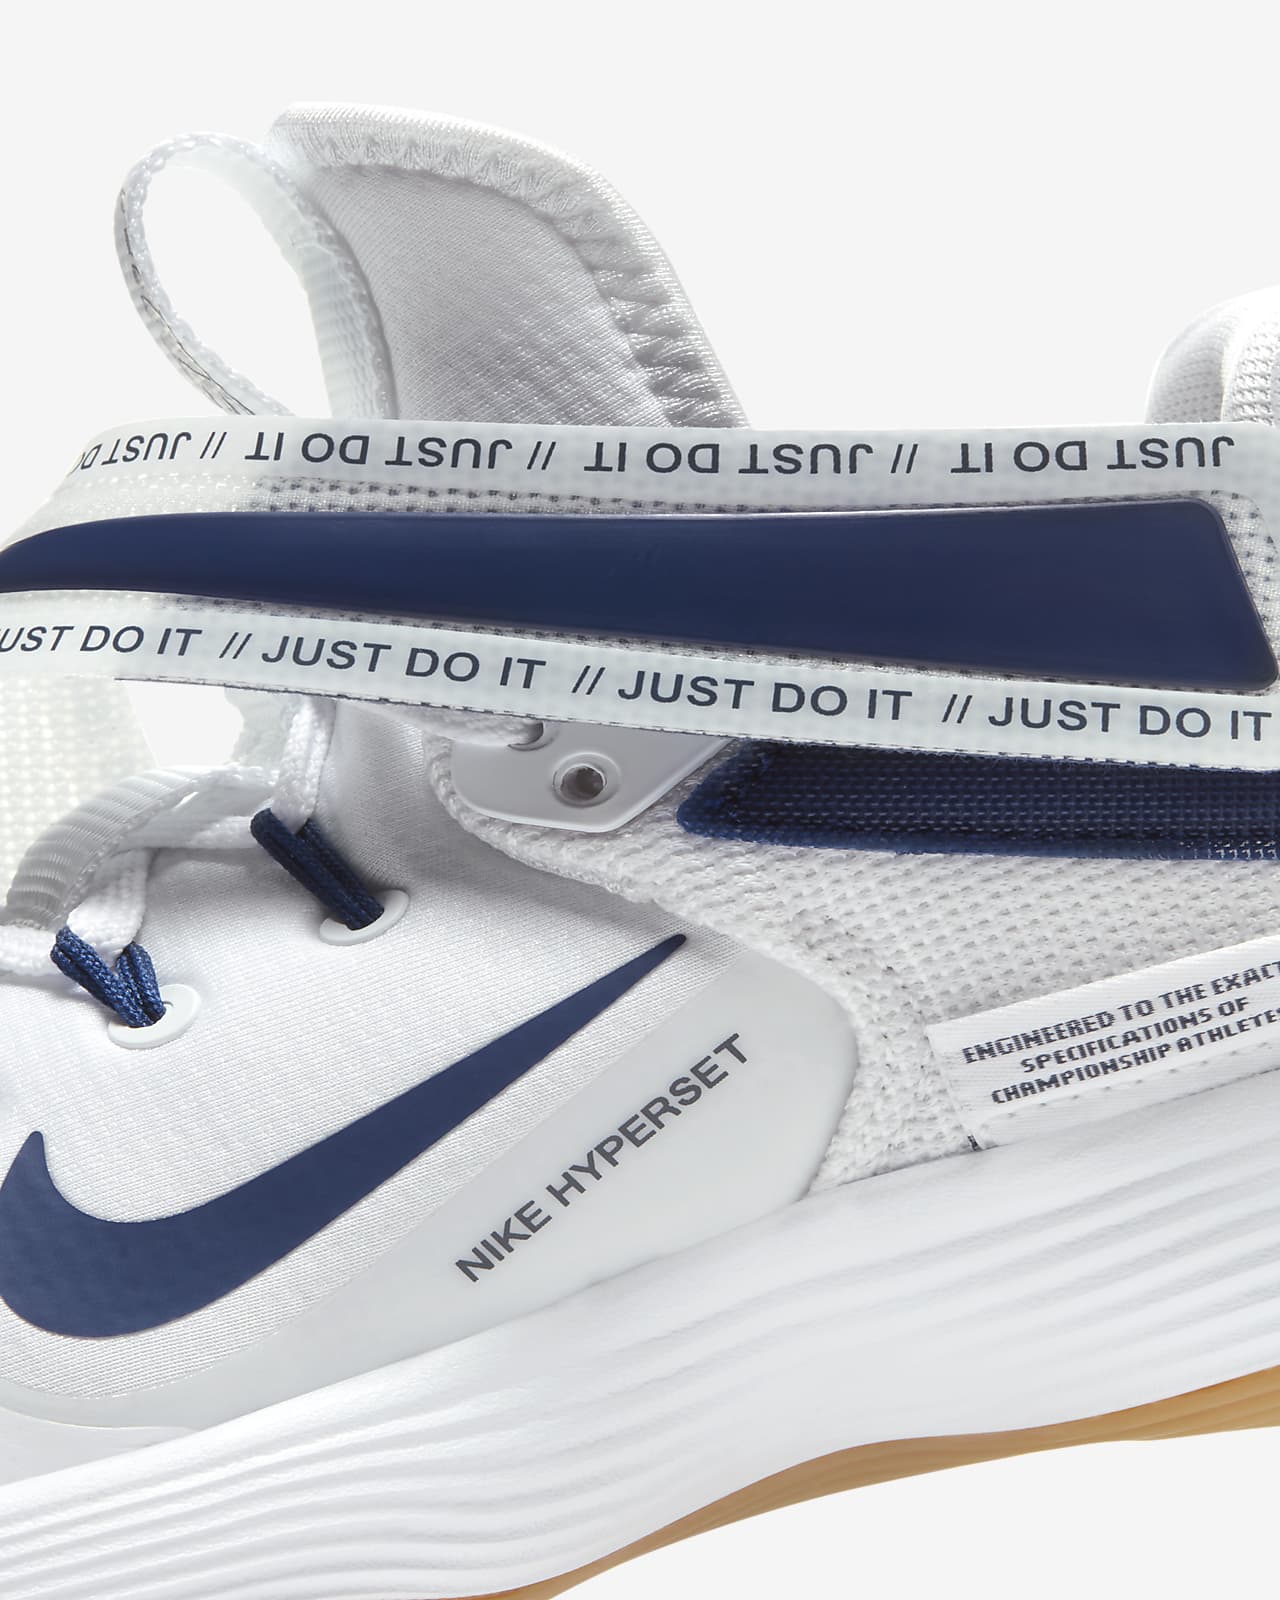 nike hyper volleyball shoes